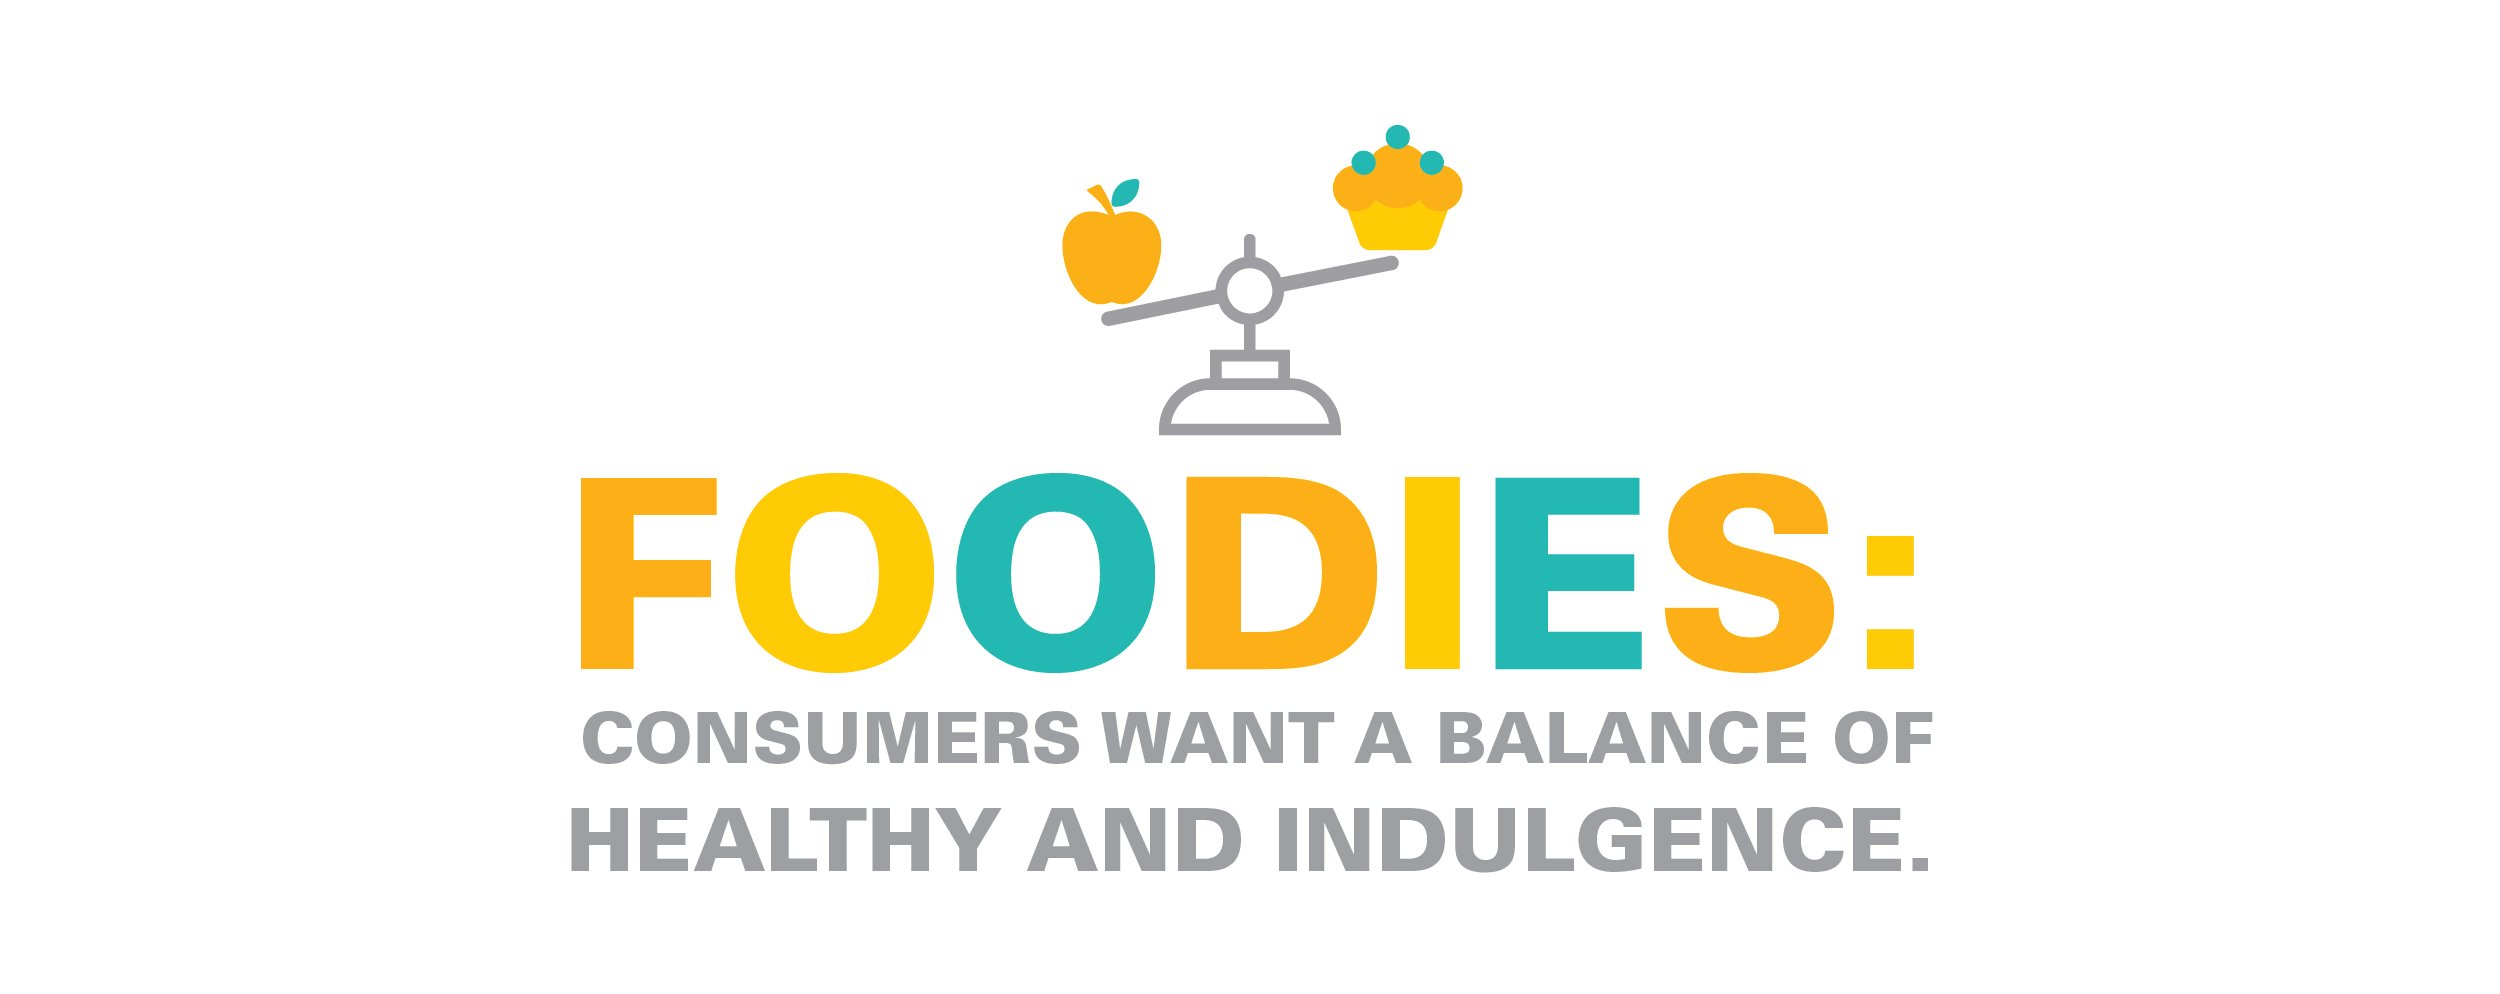 Foodies: Consumers want a balance of healthy and indulgence.